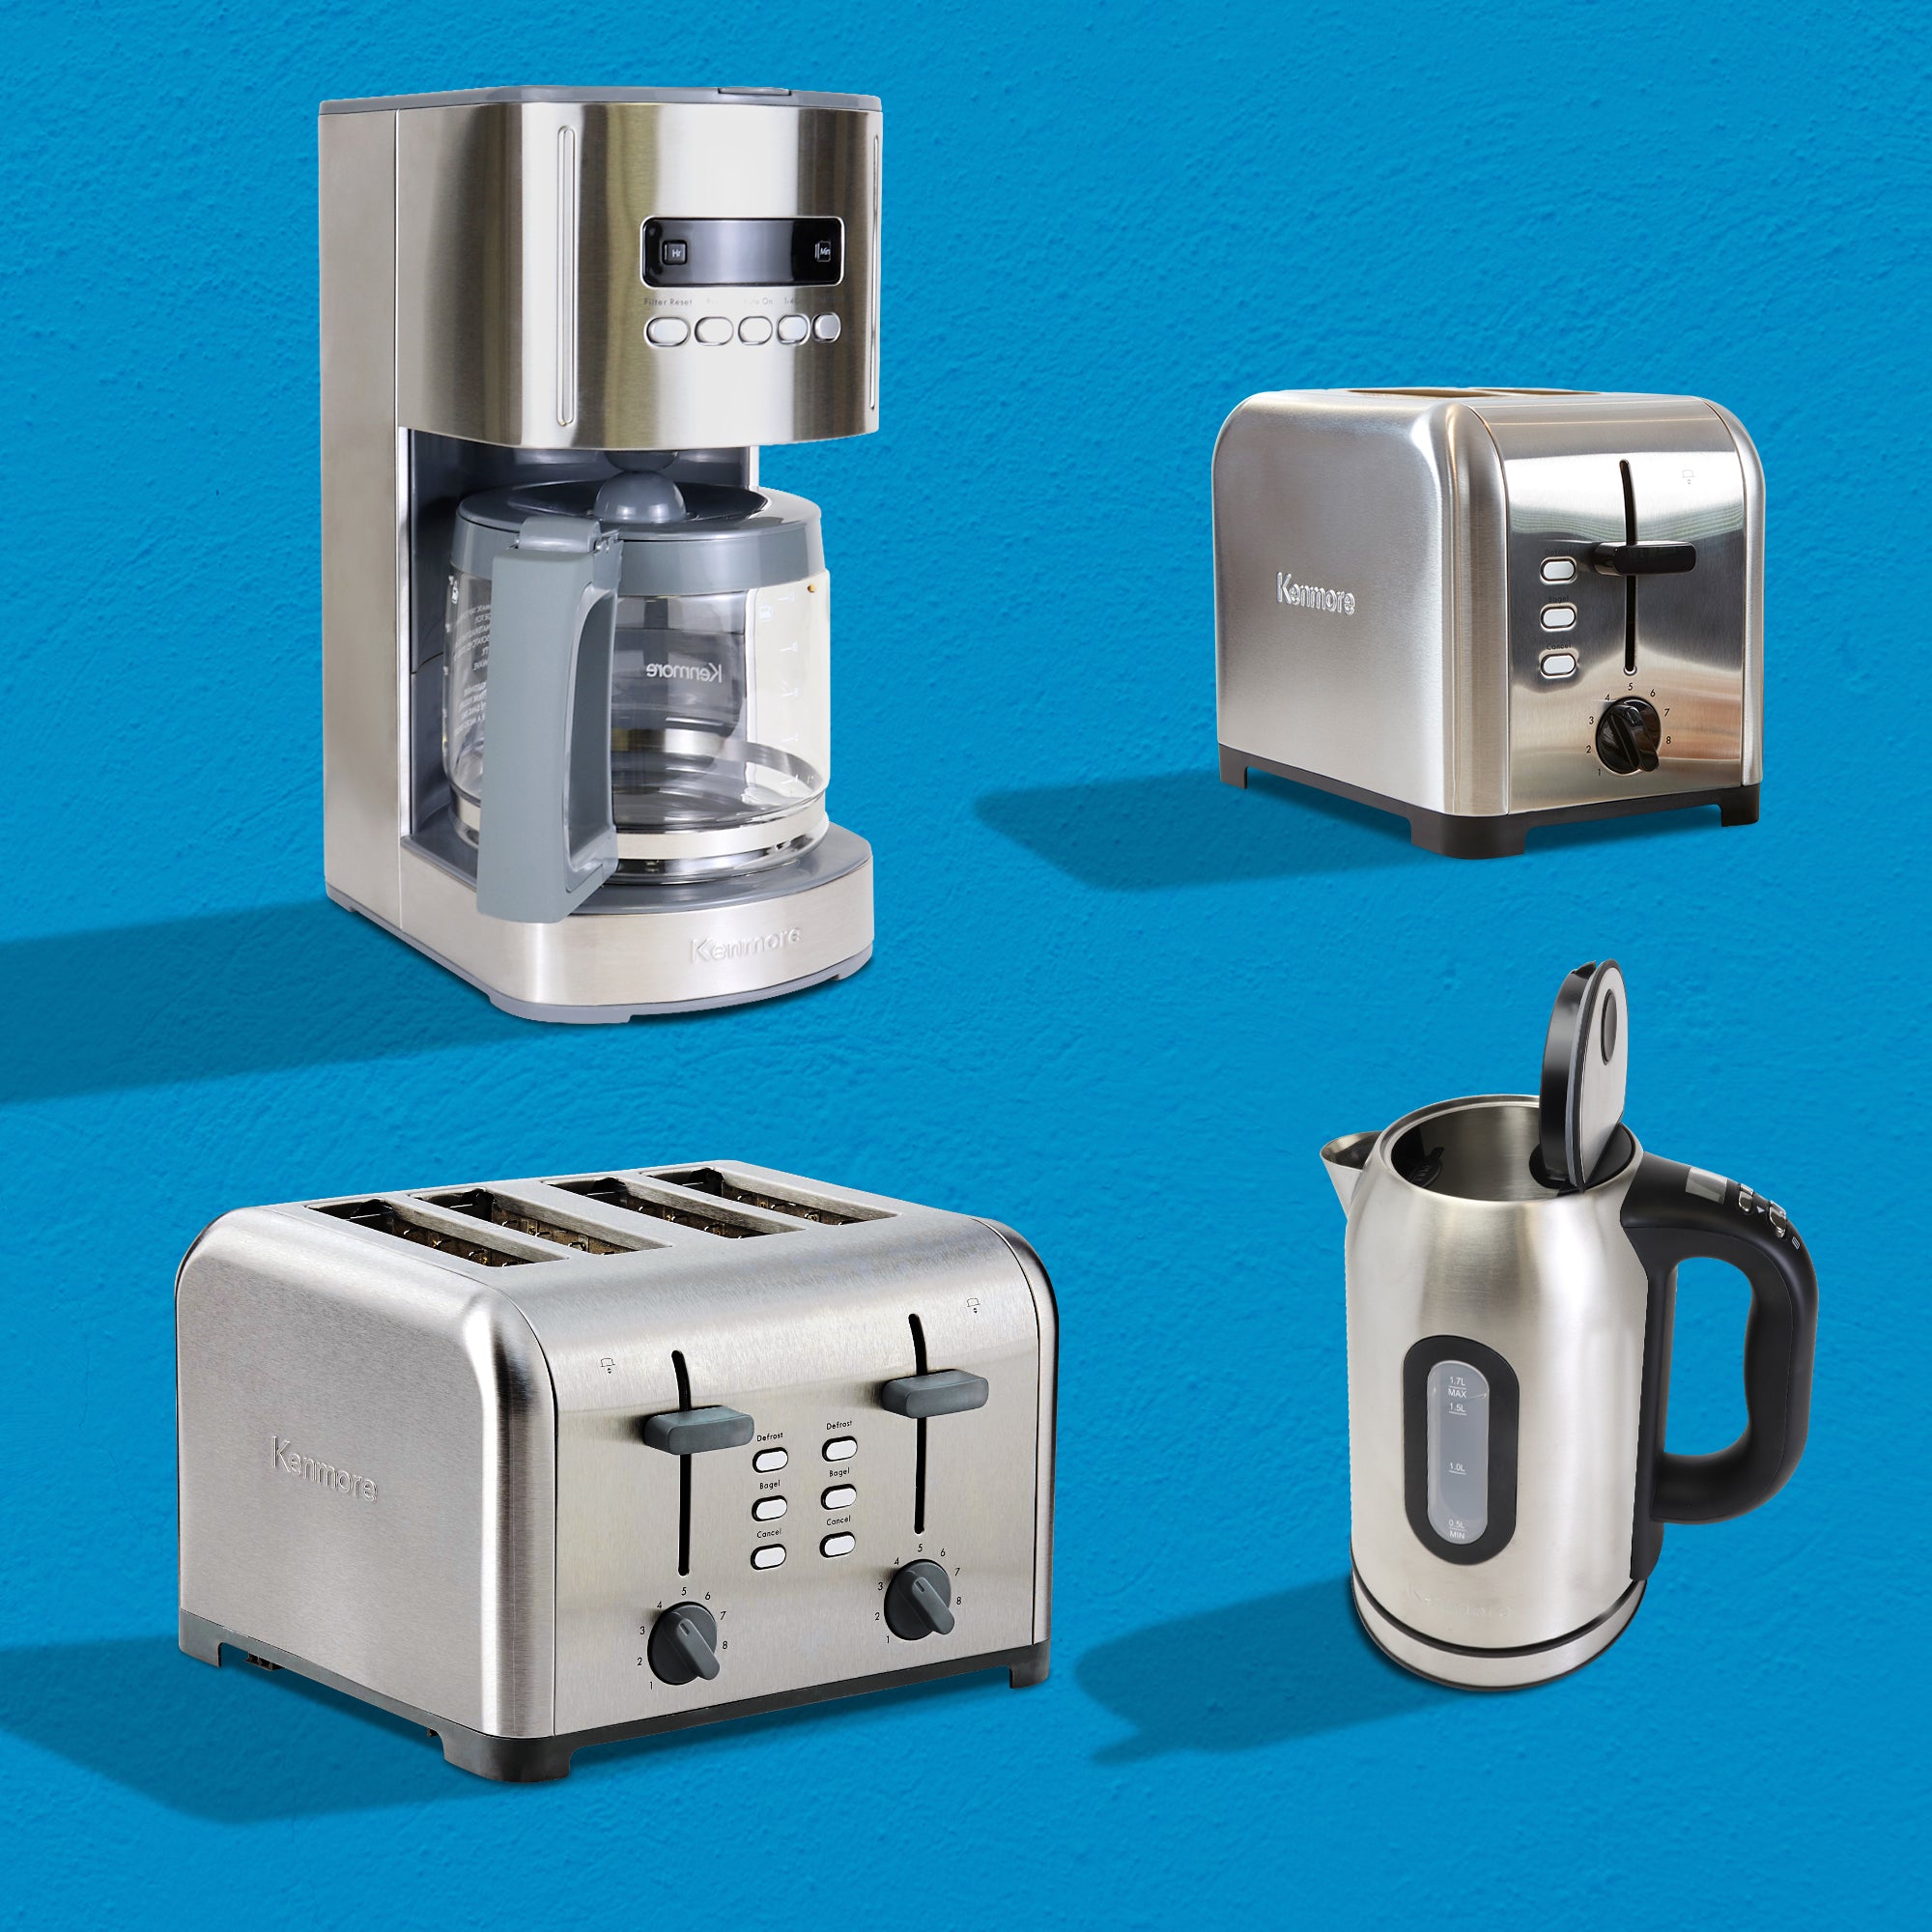 Four matching Kenmore small appliances (12-Cup Programmable Coffee Maker; 2-Slice Toaster; 4-Slice Toaster with Dual Controls; Programmable Cordless Kettle) on a turquoise background